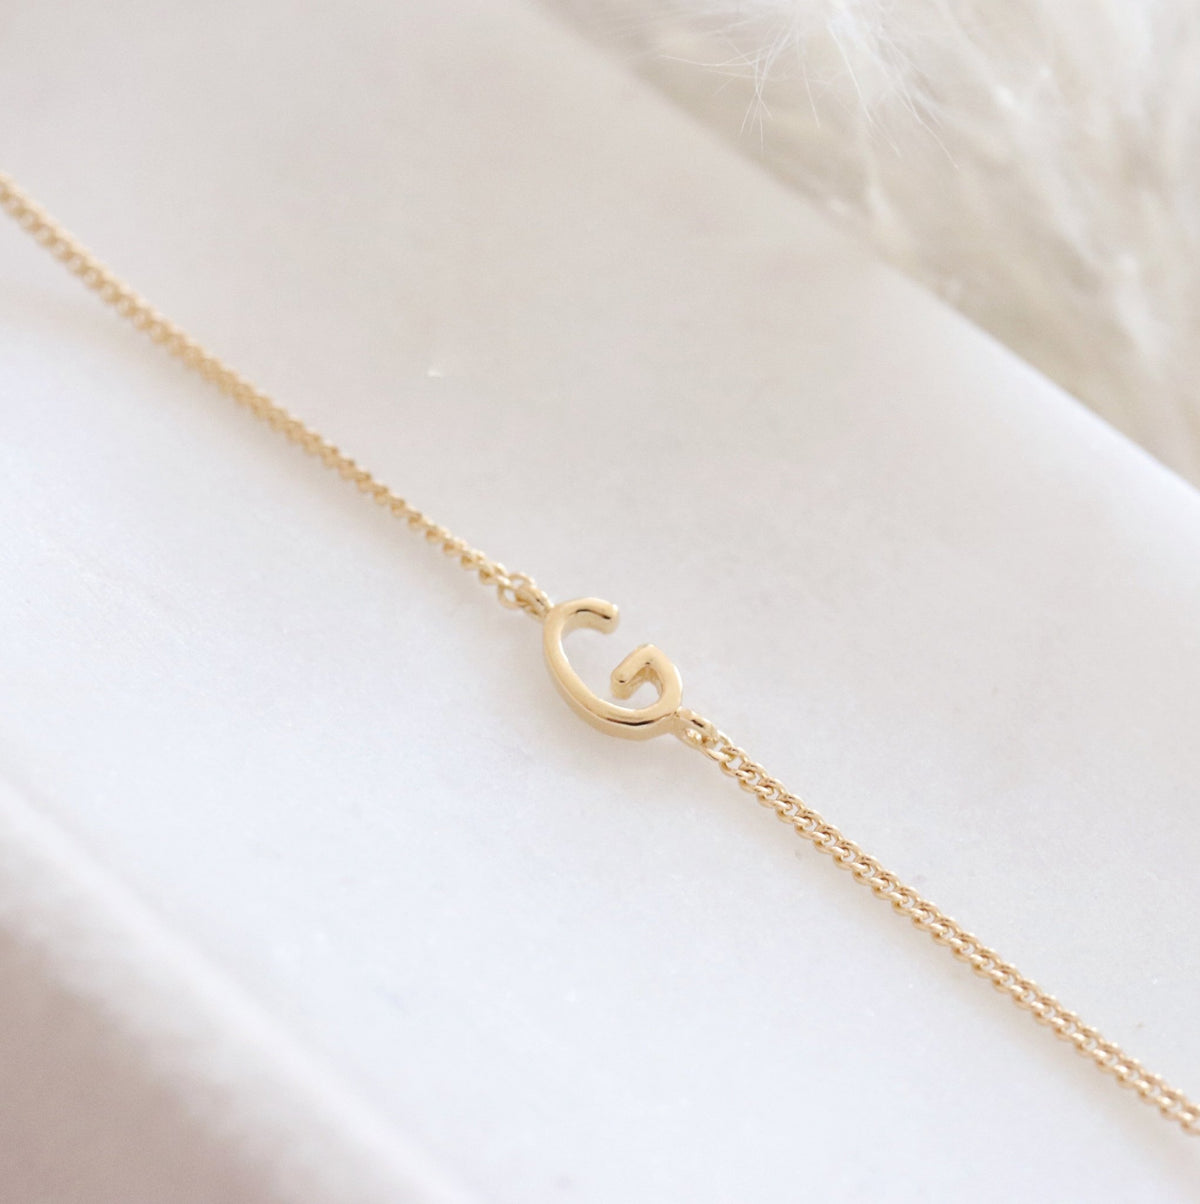 NOTABLE OFFSET INITIAL NECKLACE - G - GOLD - SO PRETTY CARA COTTER